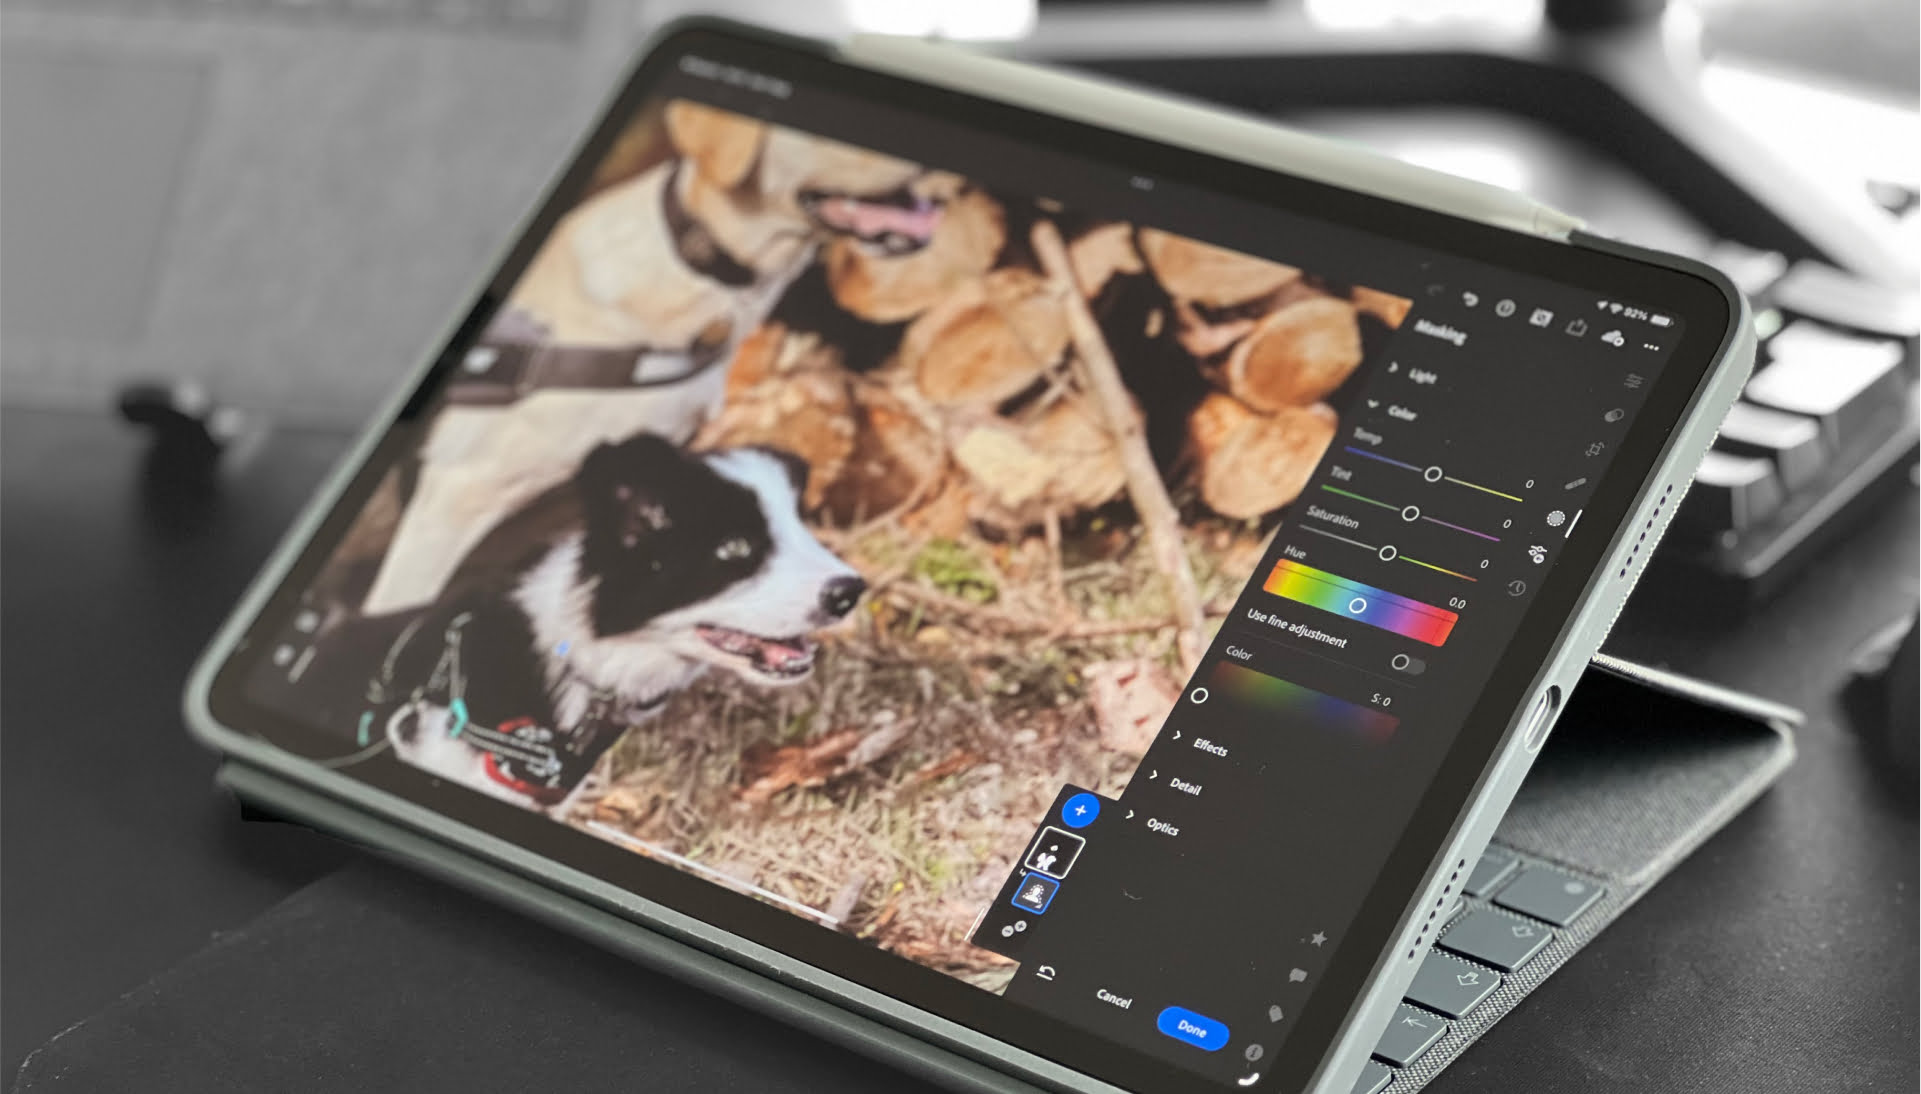 Photo editing of dogs using photoshop for iPad